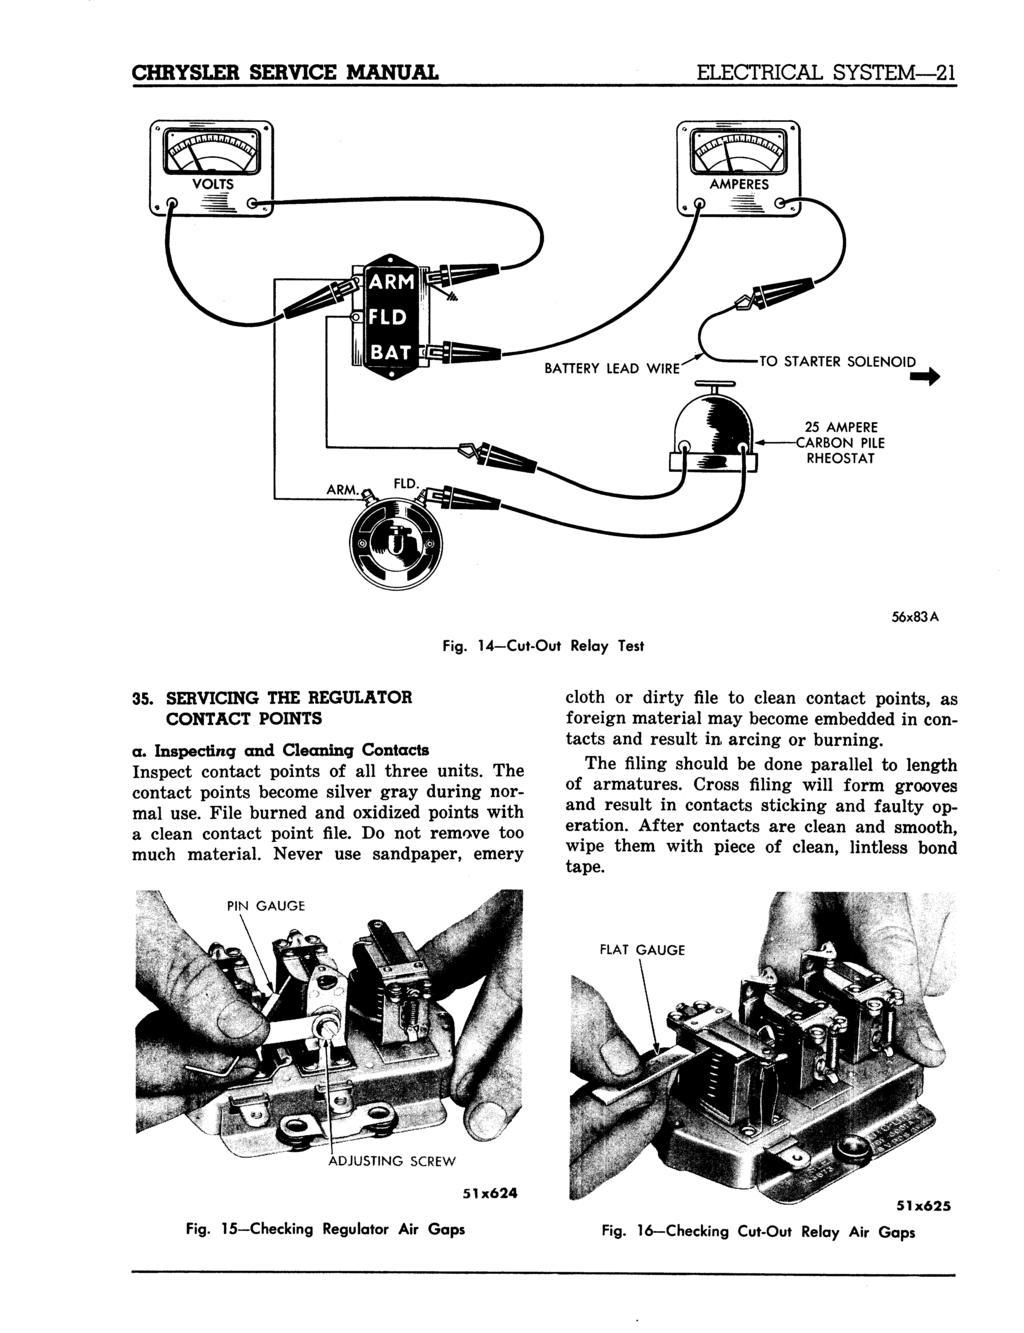 CHRYSLER SERVICE MANUAL ELECTRICAL SYSTEM 21 TO STARTER SOLENOID 25 AMPERE RBON PILE RHEOSTAT 56x83A Fig. Cut-Out Relay Test 35. SERVICING THE REGULATOR CONTACT POINTS a.